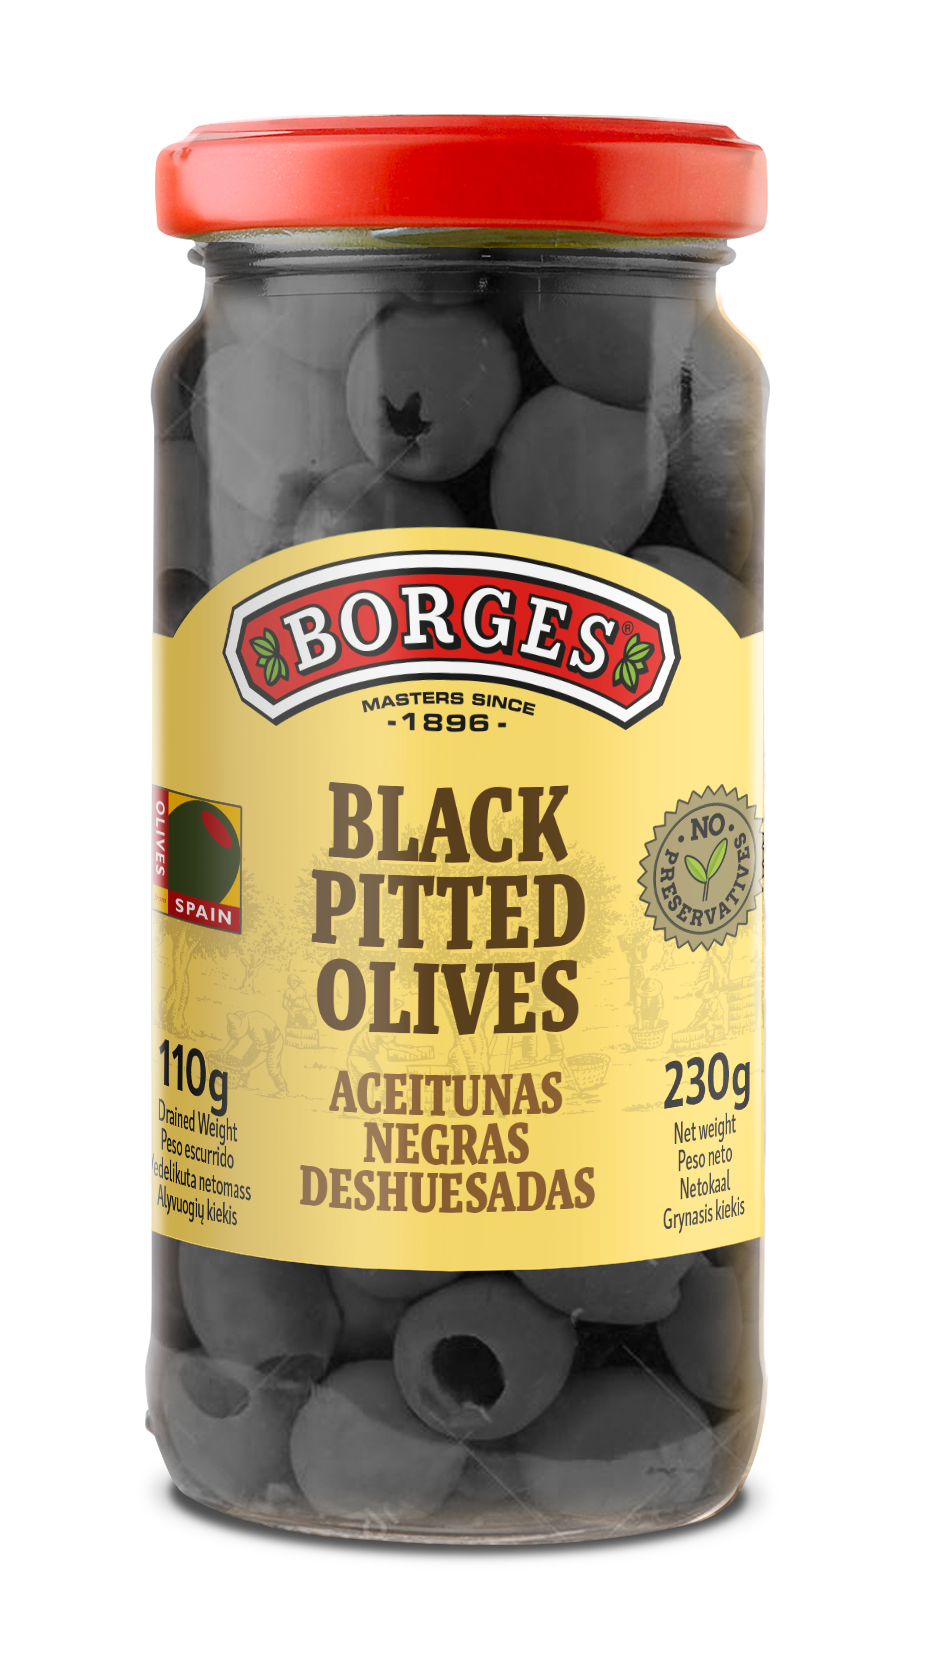 BORGES BLACK PITTED OLIVES